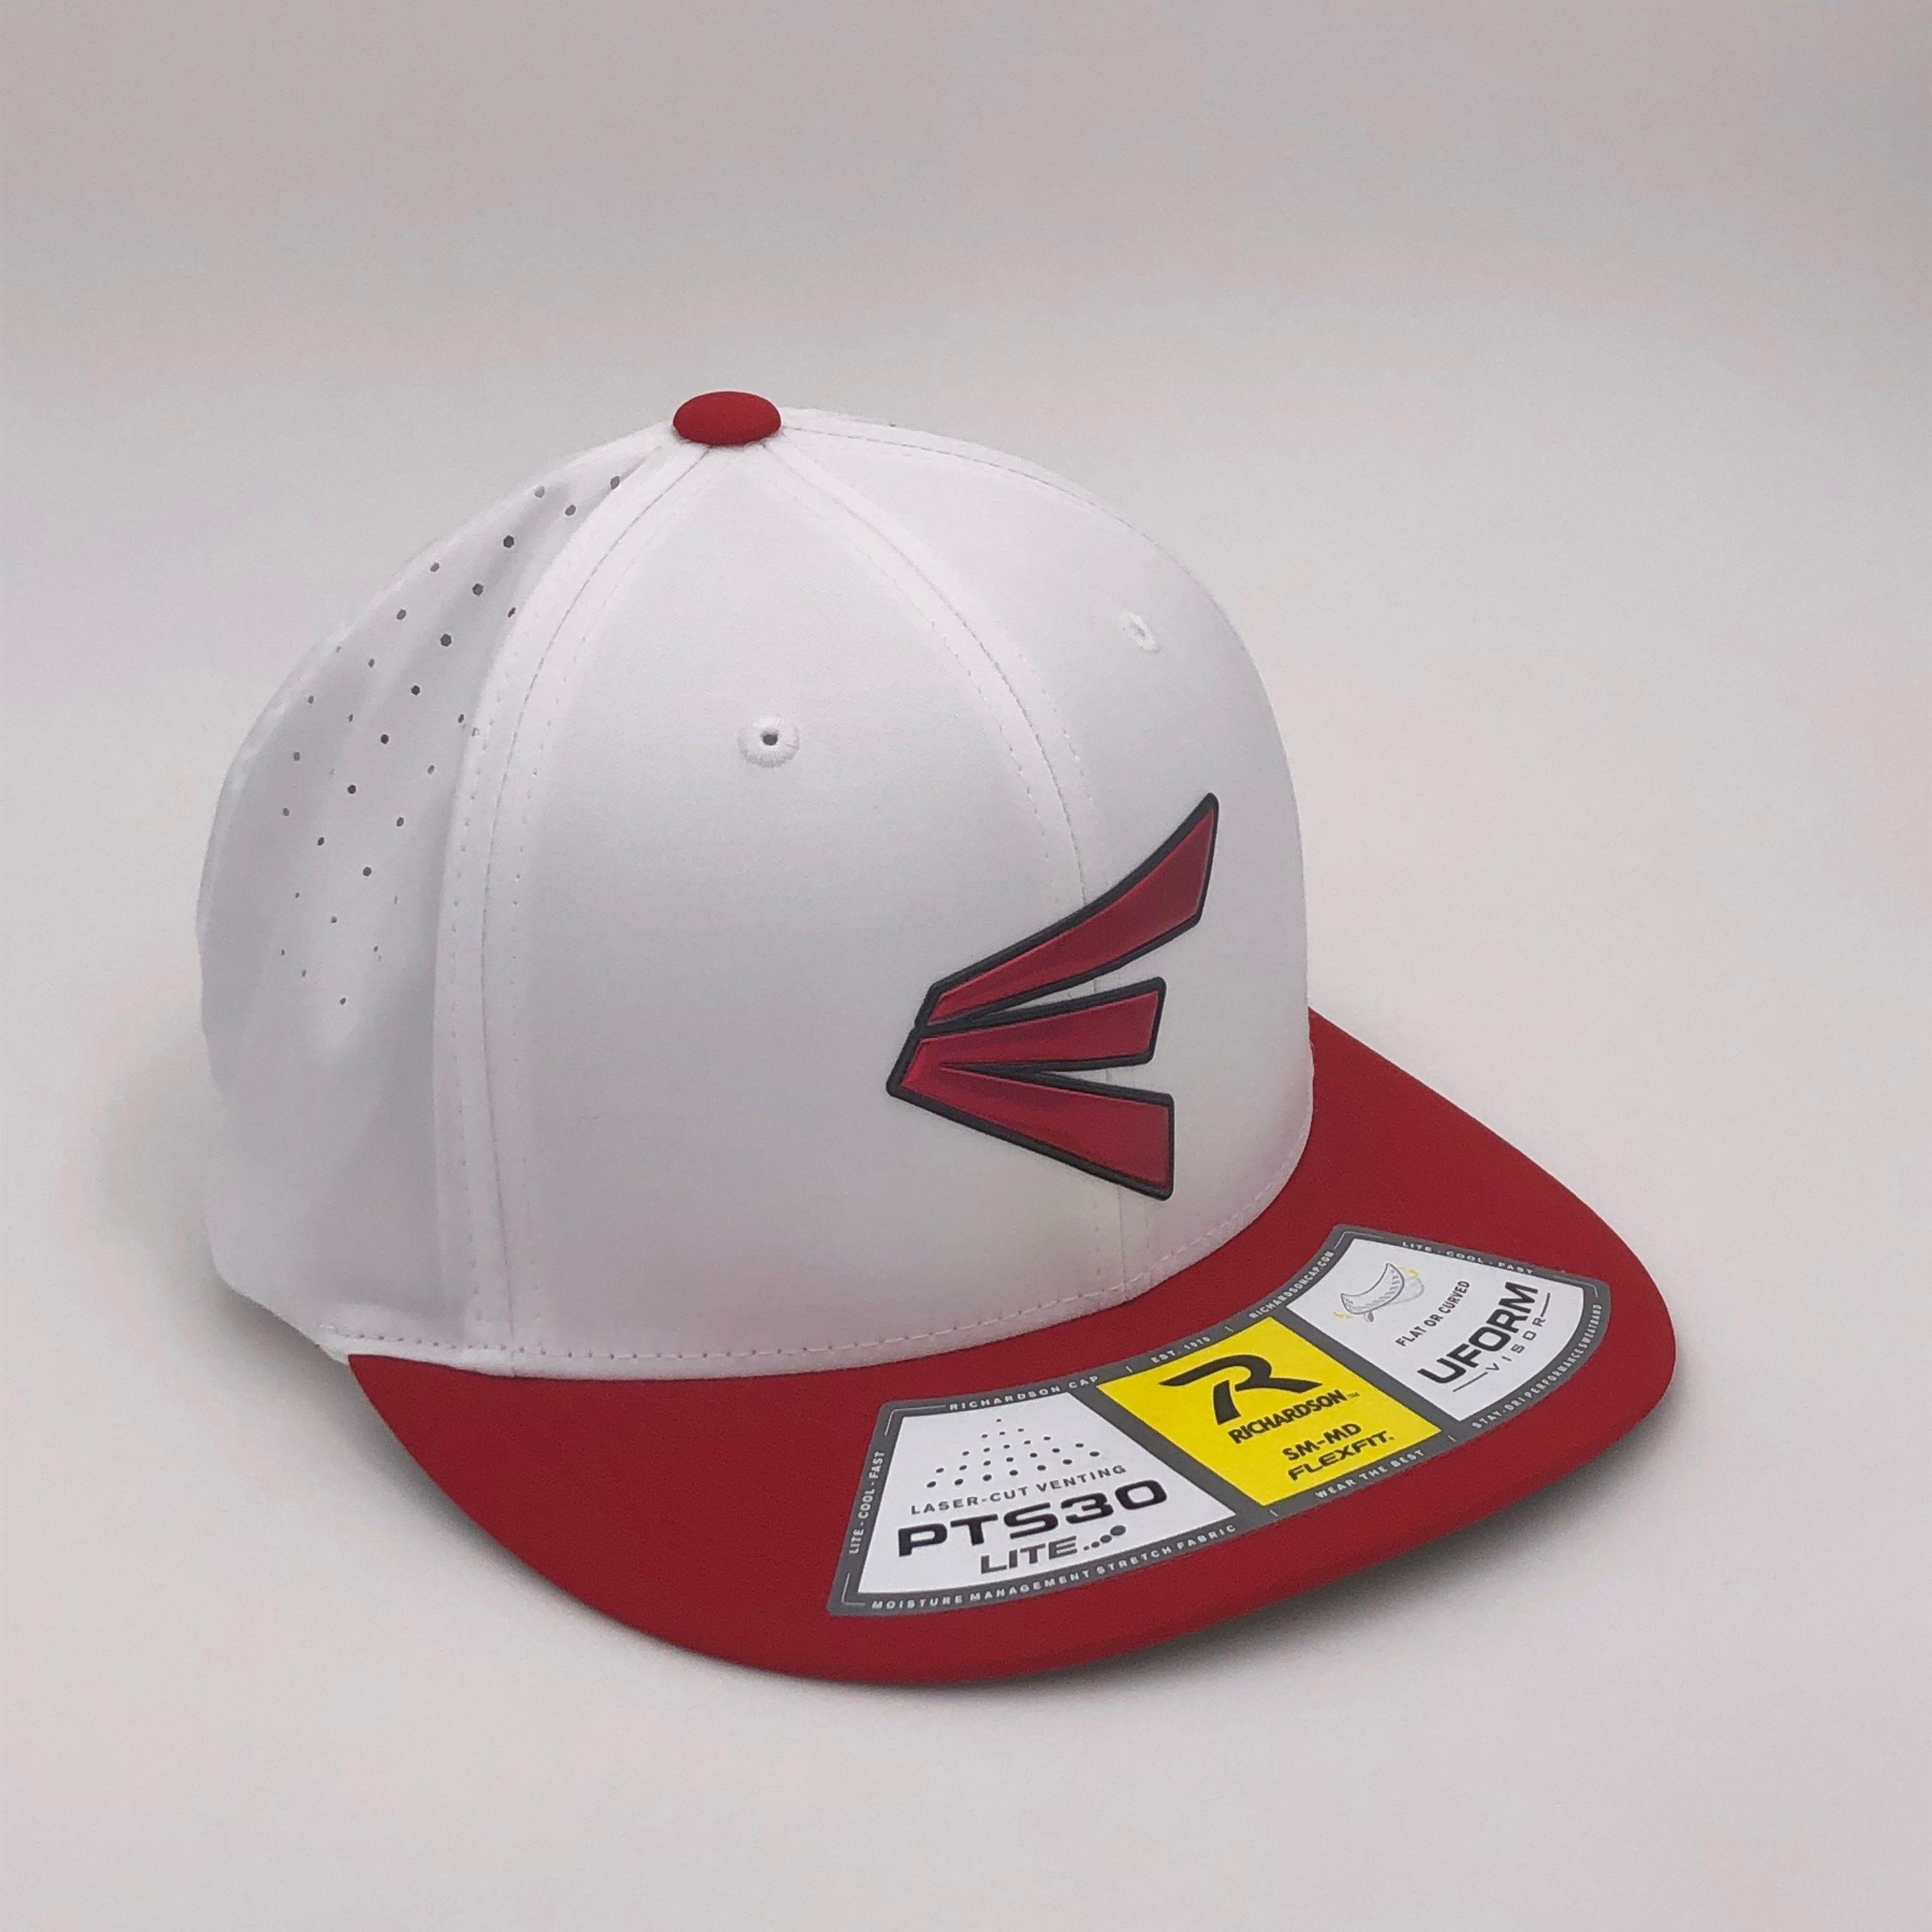 Man in a Red Hat Logo - Easton (PTS30) Limited Edition Poly Press Hat-White + Red Hat ...